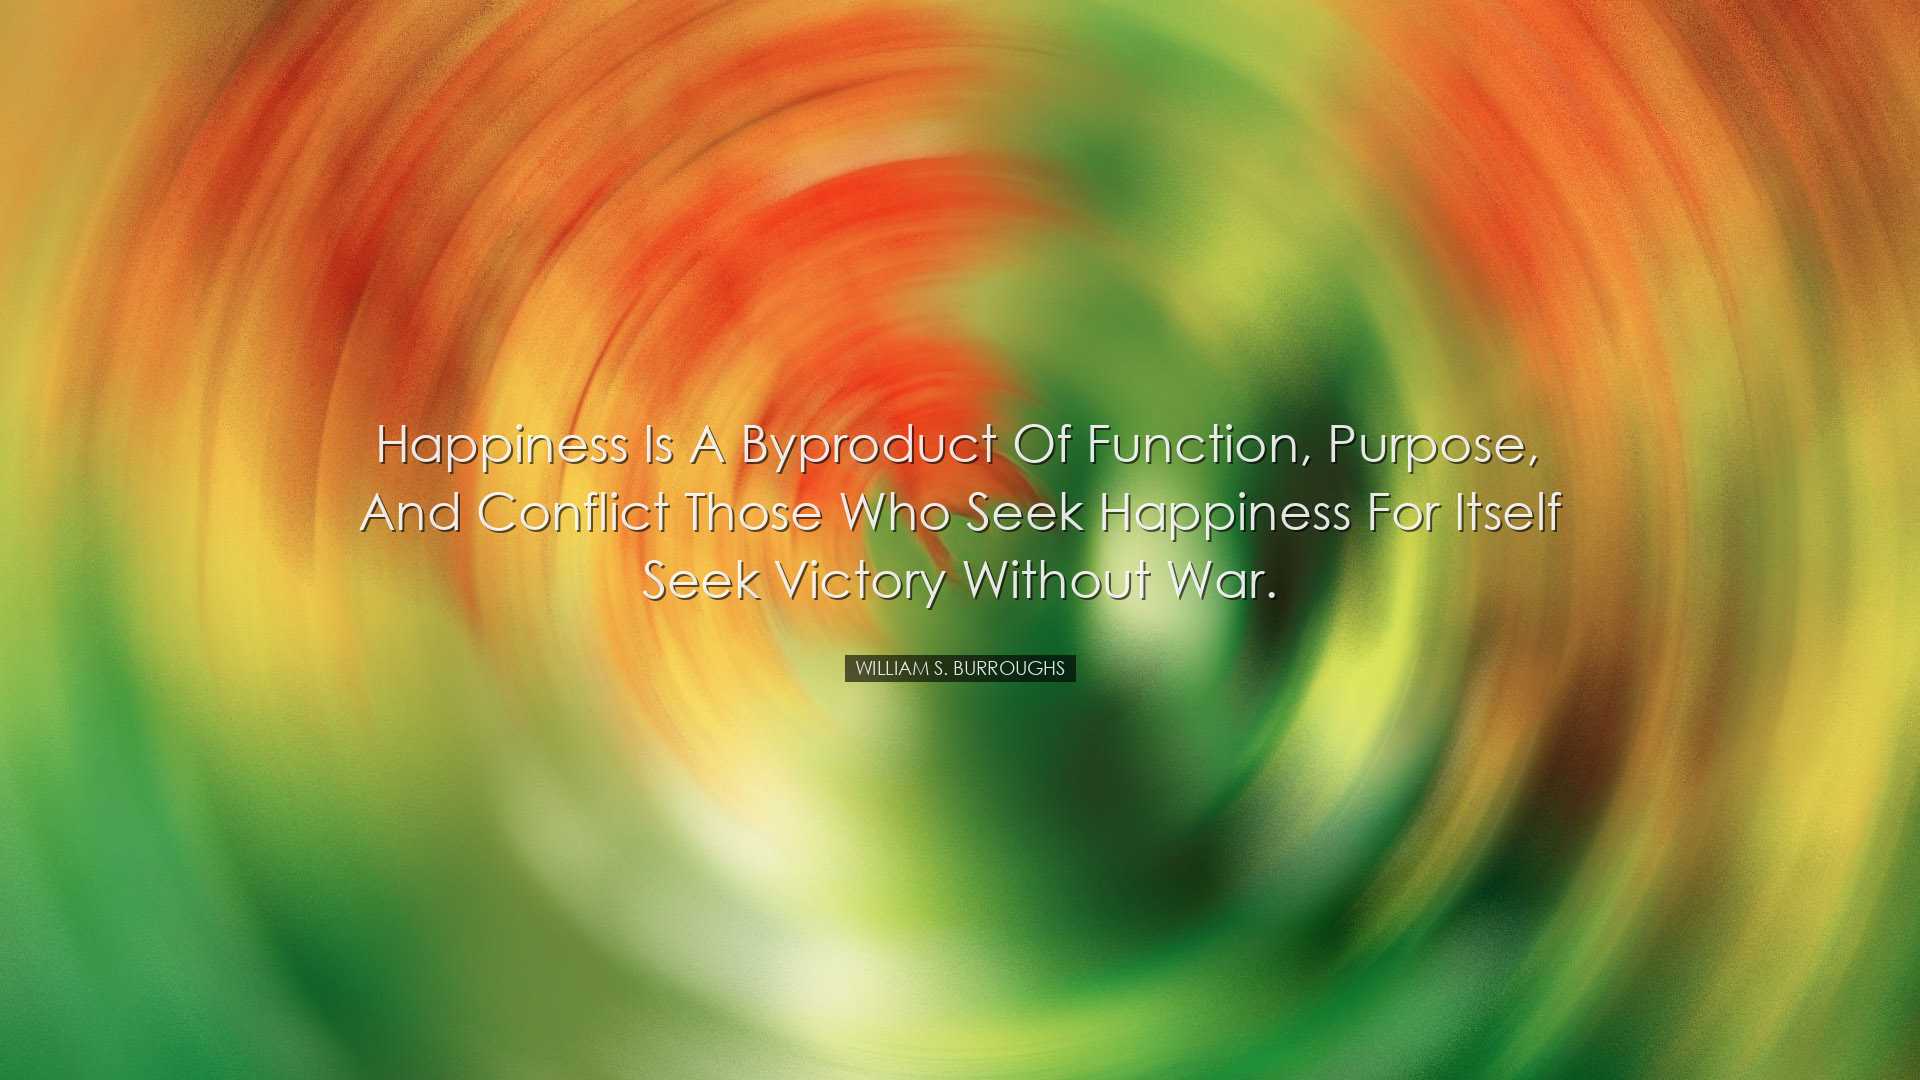 Happiness is a byproduct of function, purpose, and conflict those